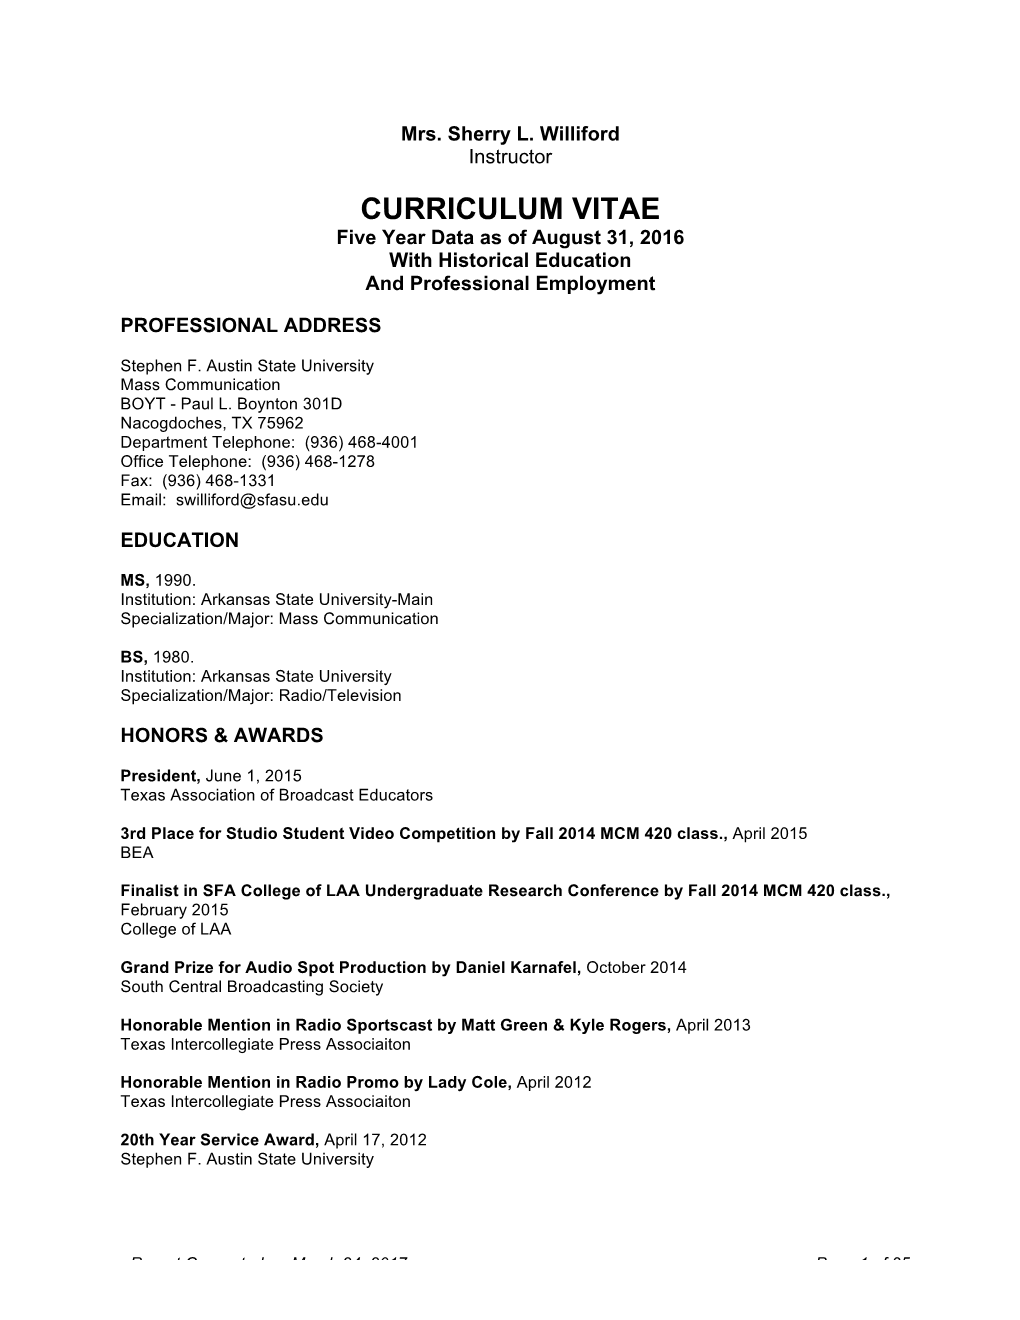 CURRICULUM VITAE Five Year Data As of August 31, 2016 with Historical Education and Professional Employment